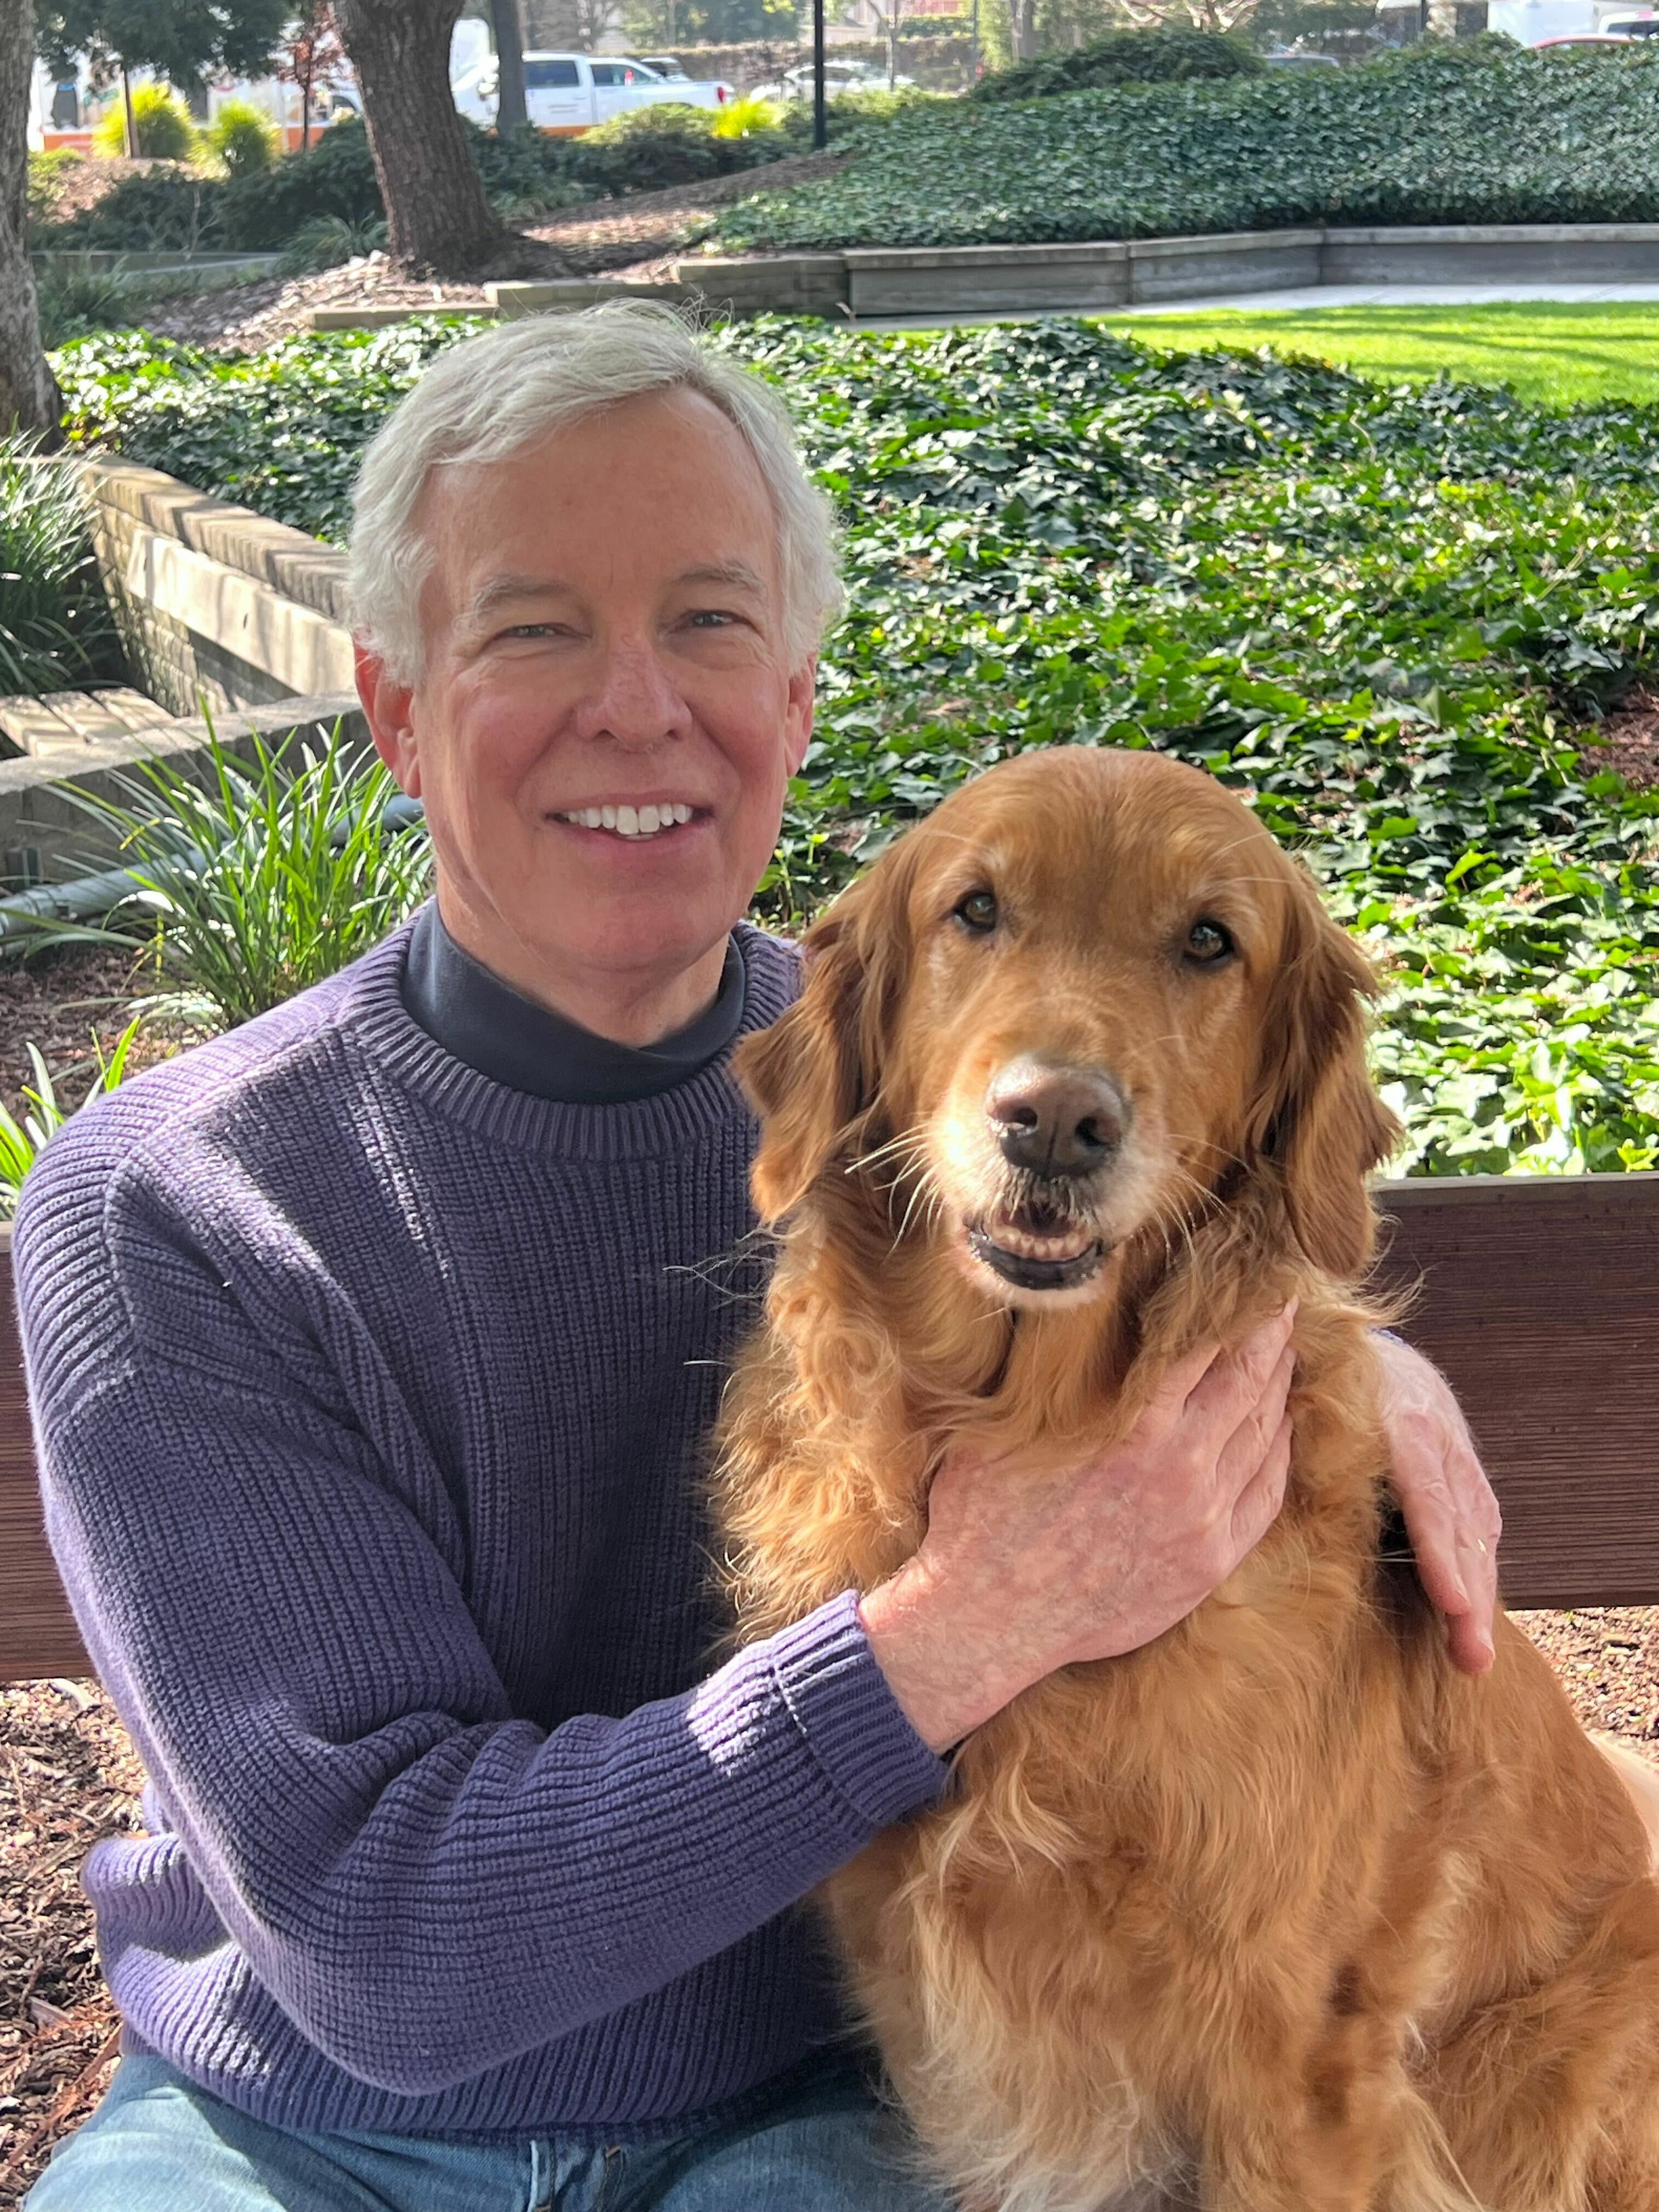 Chris sits on a bench under a shady tree with a Golden Retriever seated at his side. Both Chris and the dog smile widely at the camera.